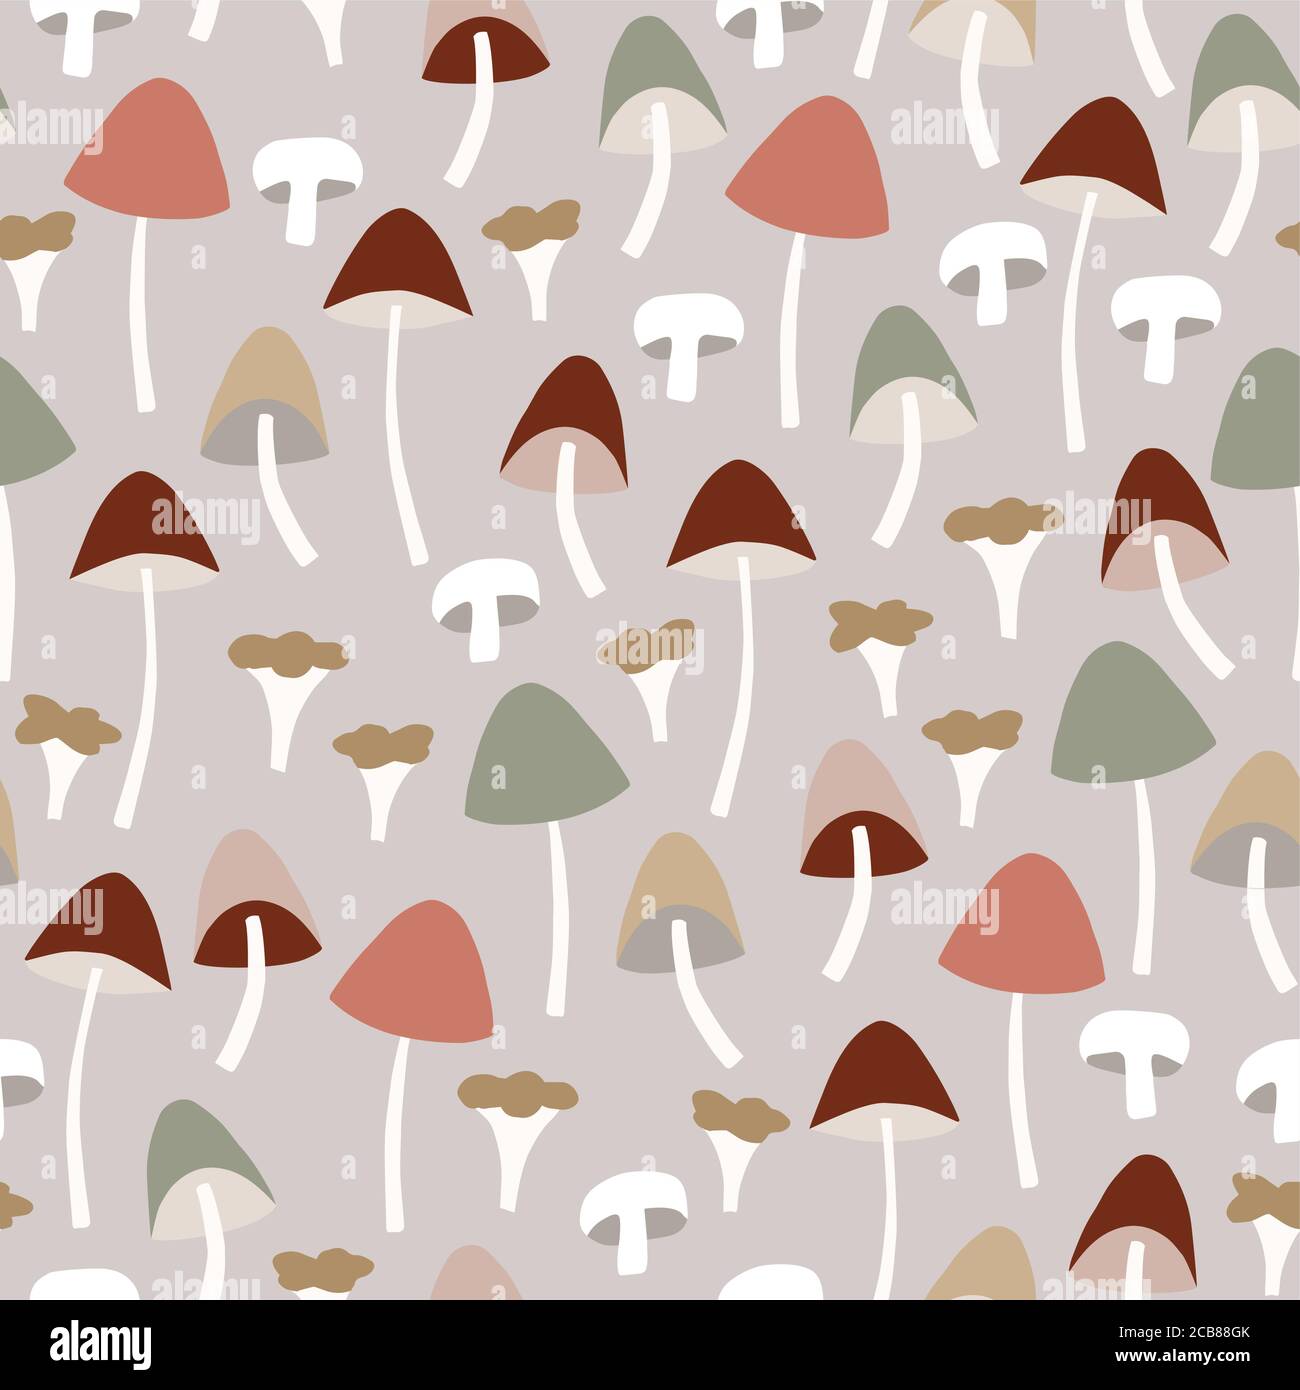 Seamless pattern with various colorful whole and cut mushrooms. Agaric, chanterelle and galerina fungi vector illustration background. Autumn tile Stock Vector